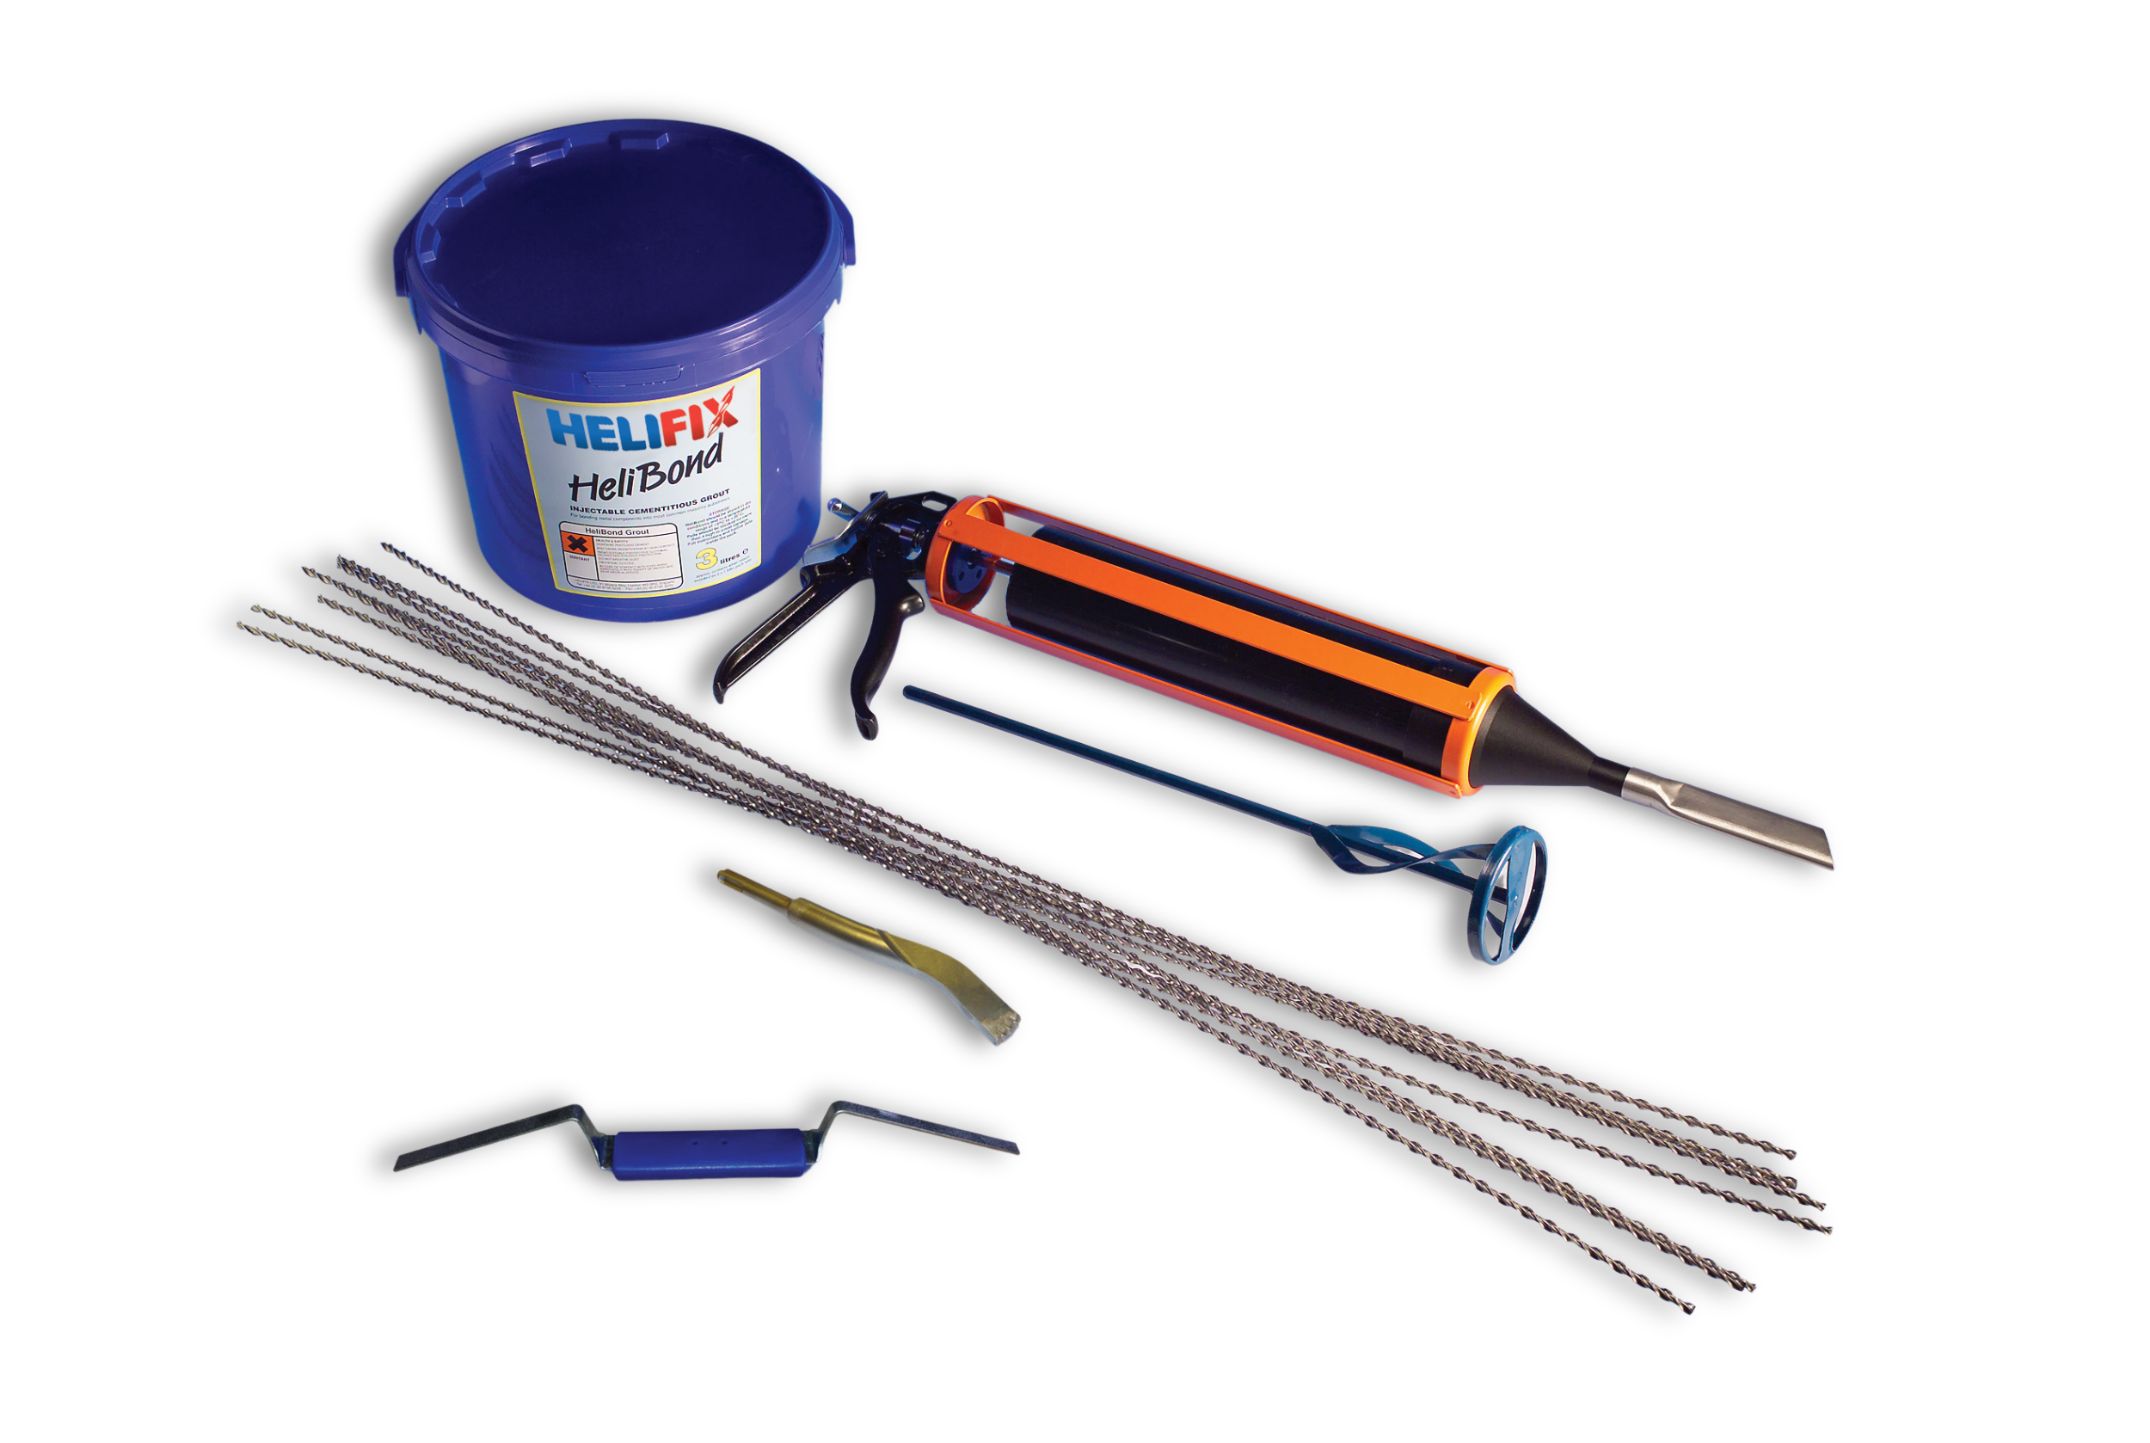 Remedial Products Archives - Helifix UK